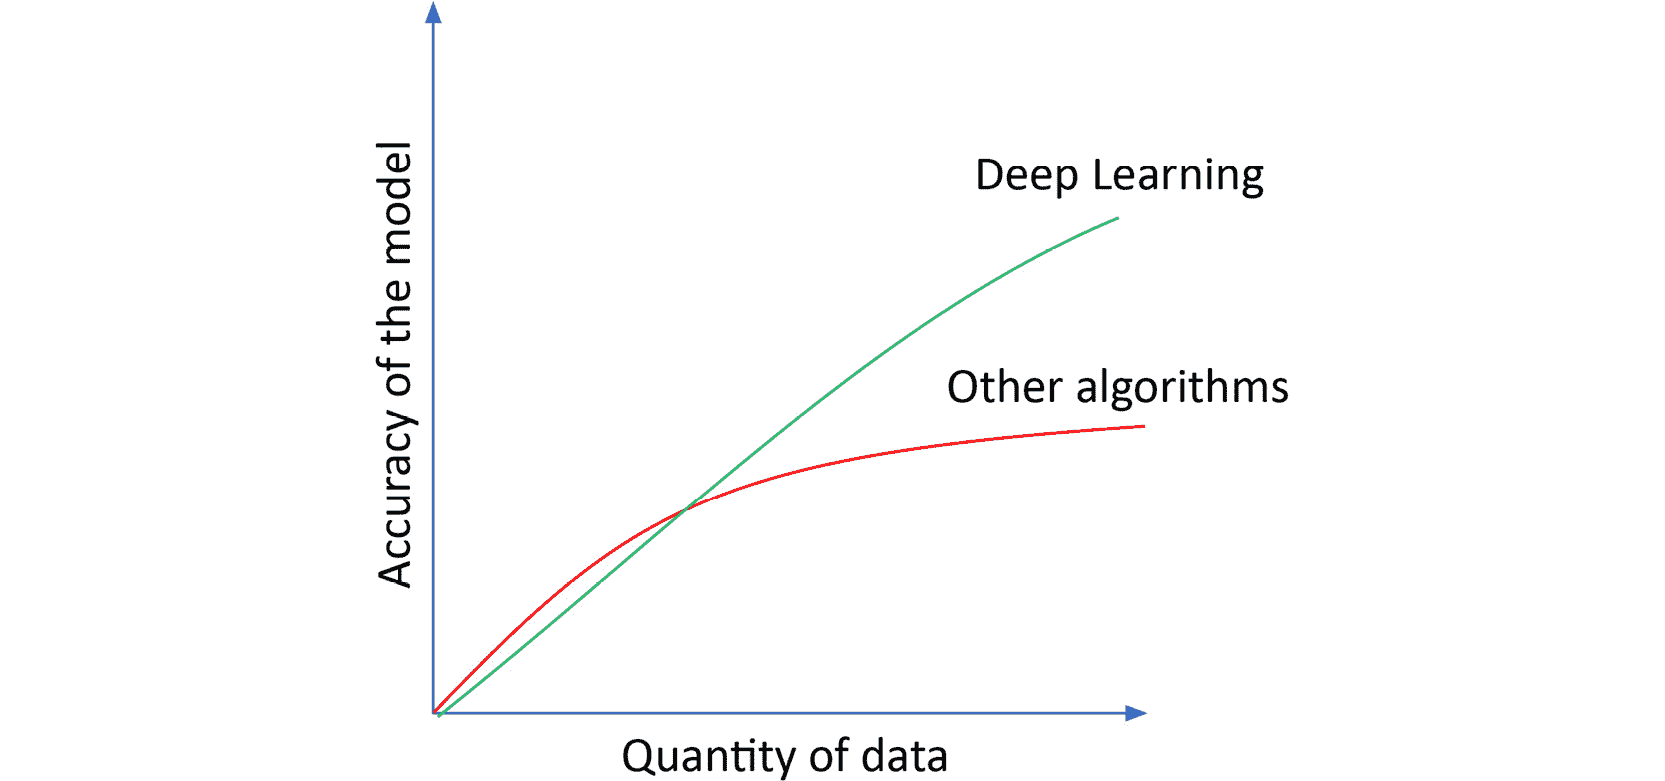 Figure 1.1: Performance of deep learning against other algorithms 